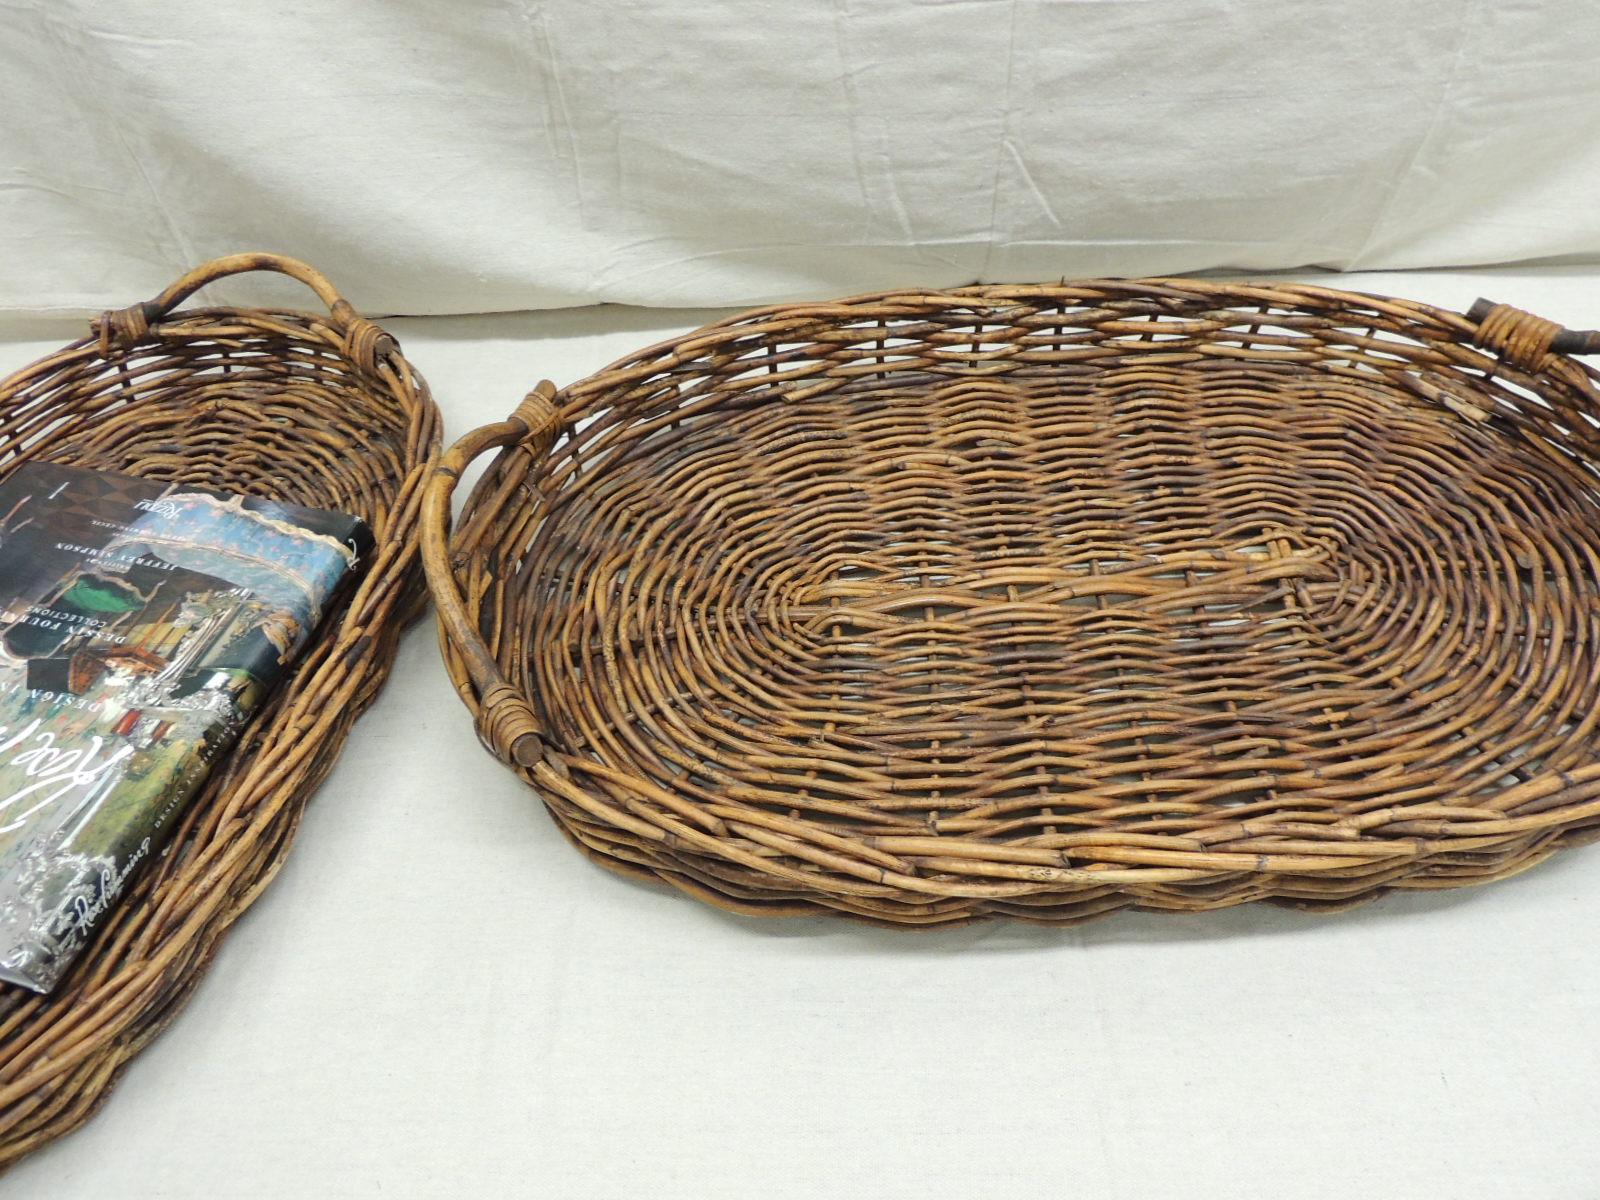 Country Set of '2' Rattan Oval Large Woven Nesting Serving Trays with Handles